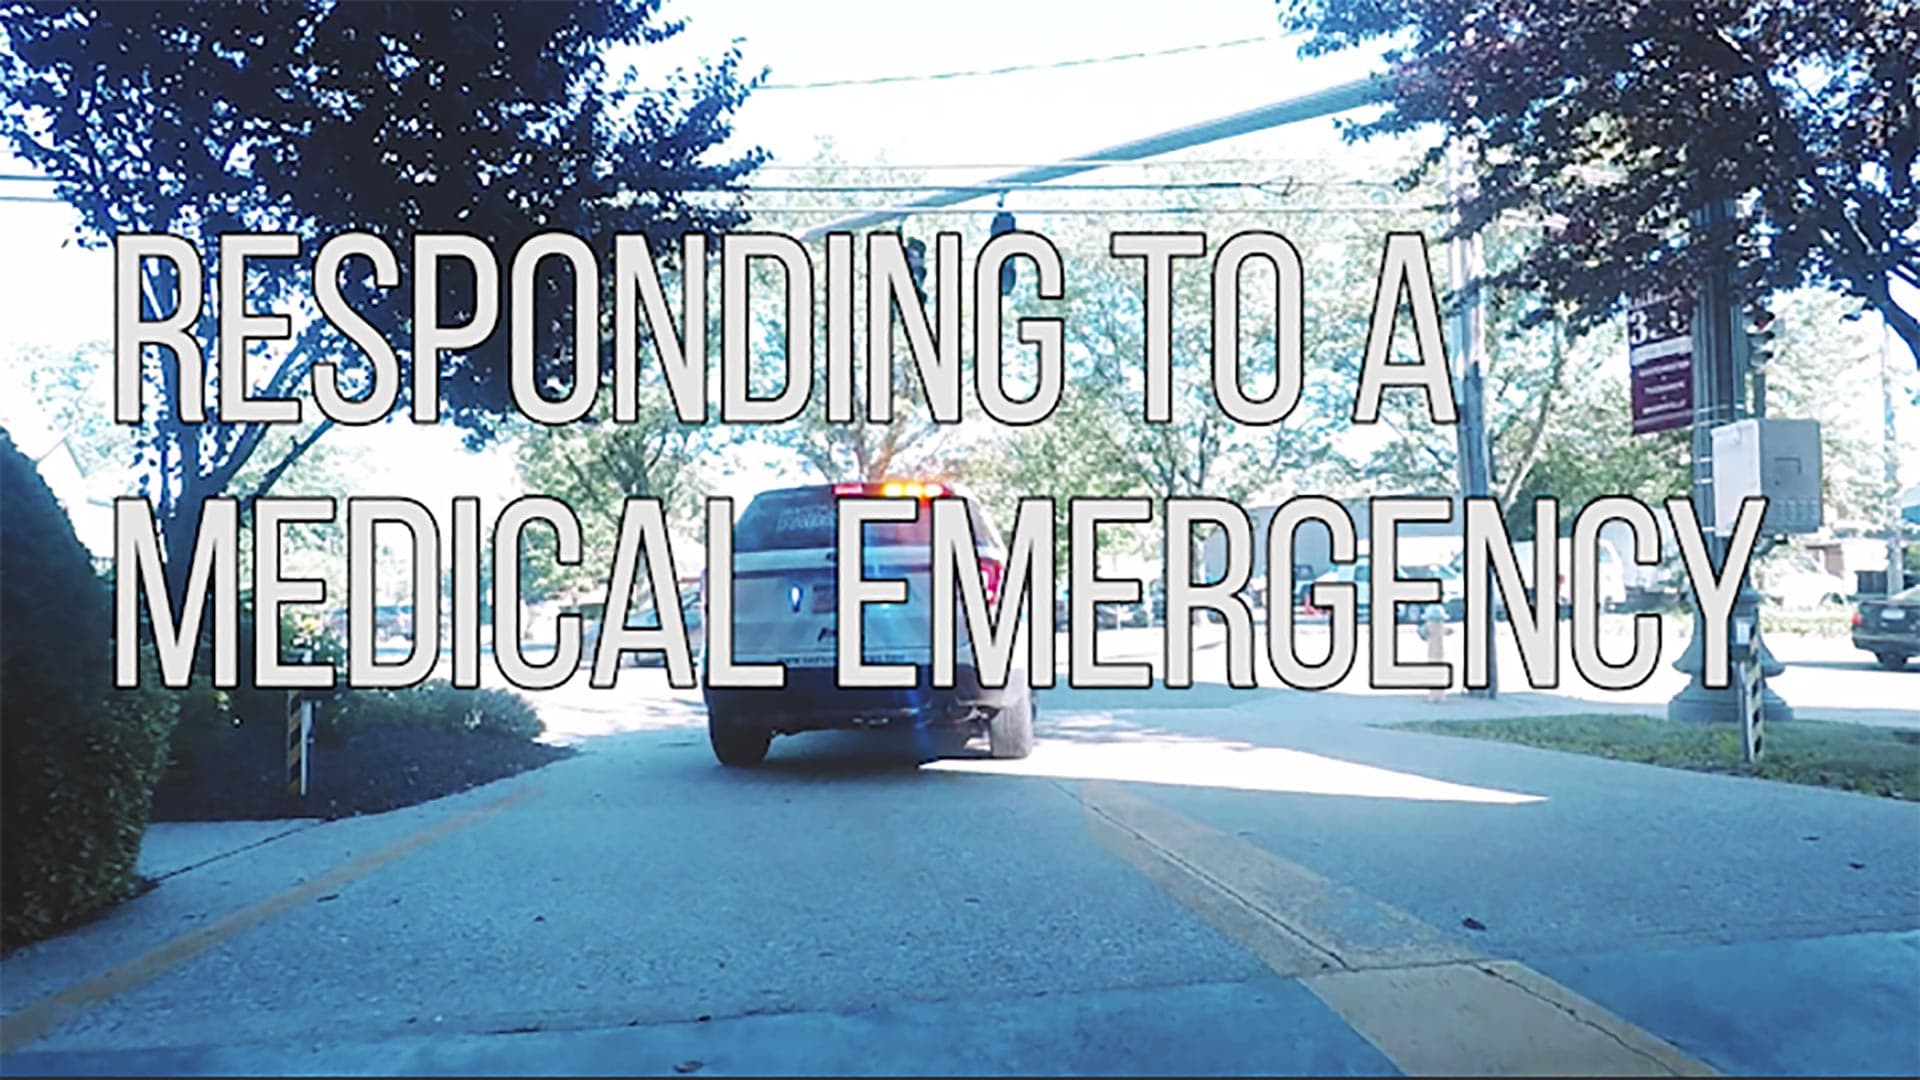 Here’s a First-Hand View of What EMTs See When Responding to a Call